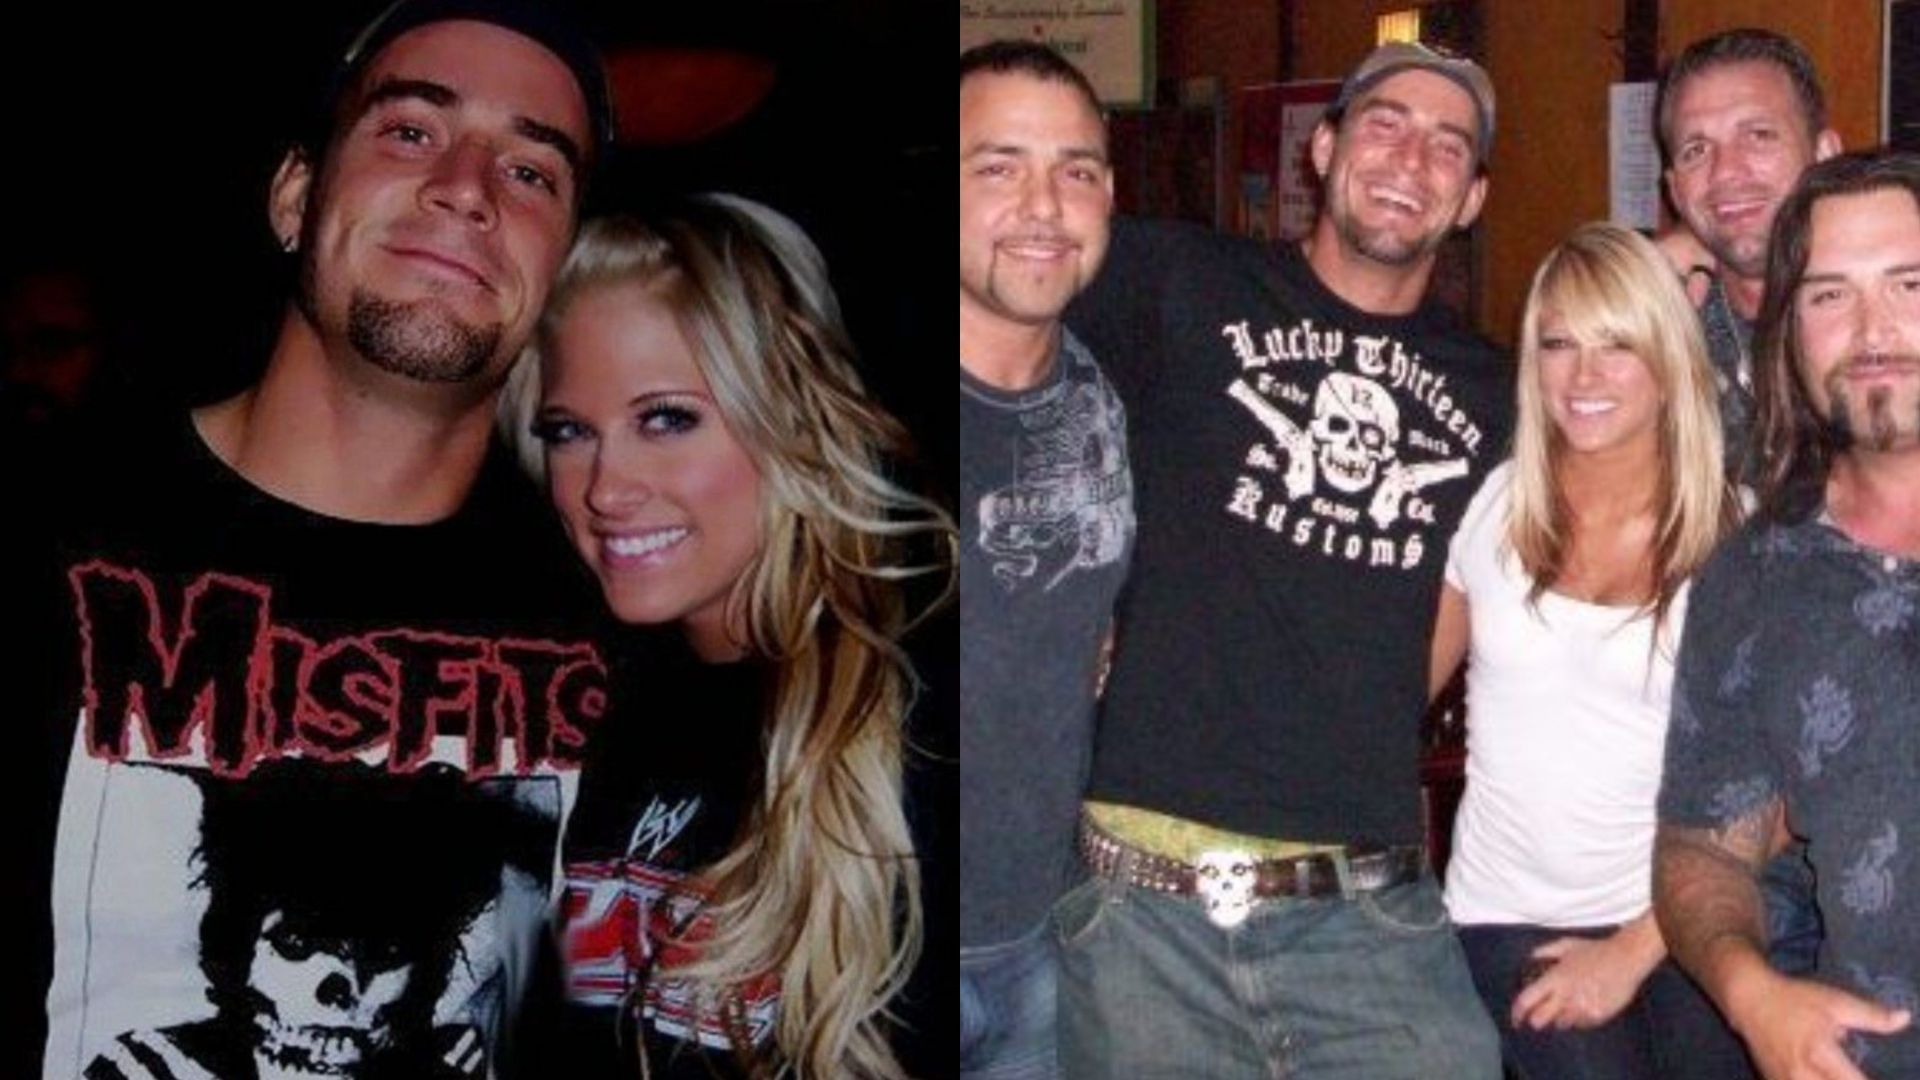 Rumors claimed that CM Punk and Kelly Kelly had a fling while in ECW